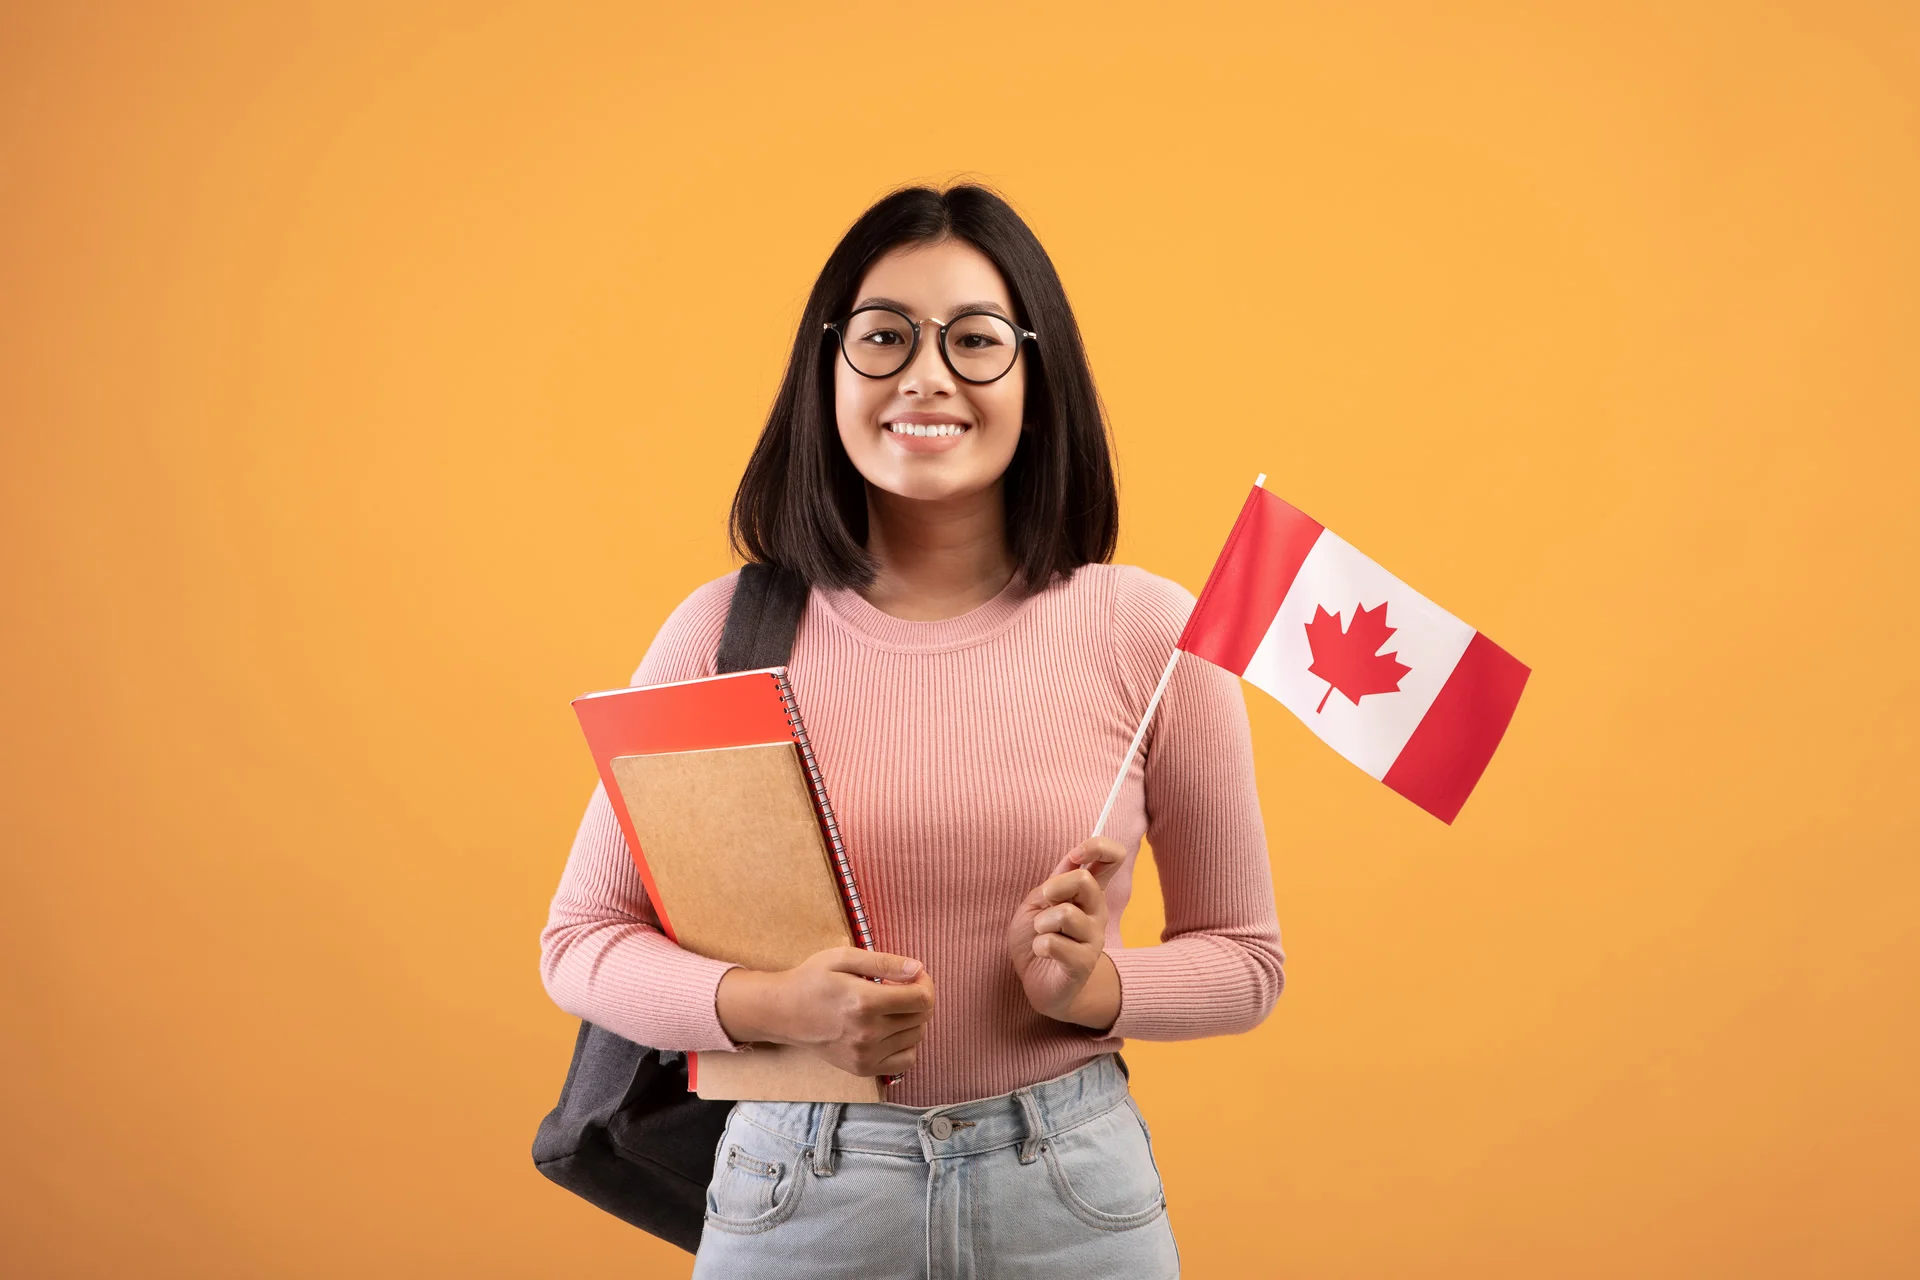 Testimony: What is it like to move to Canada?